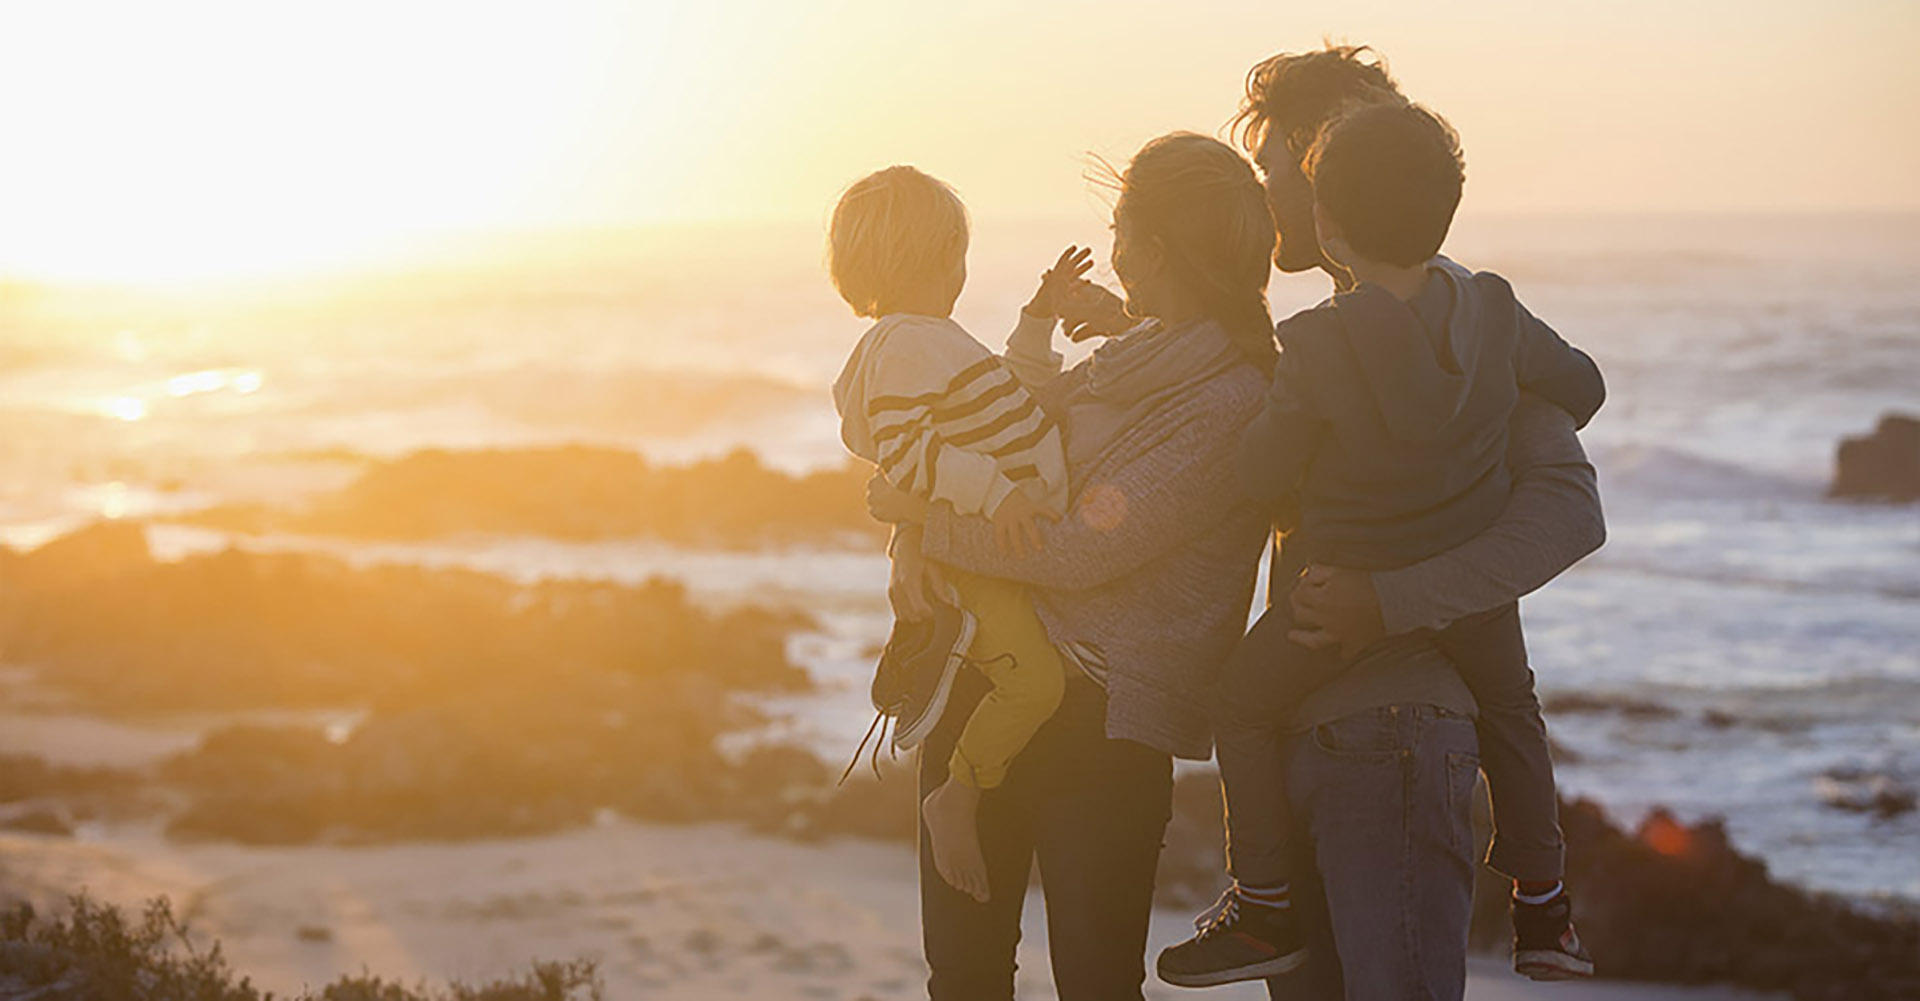 Family standing together on beach in sunset